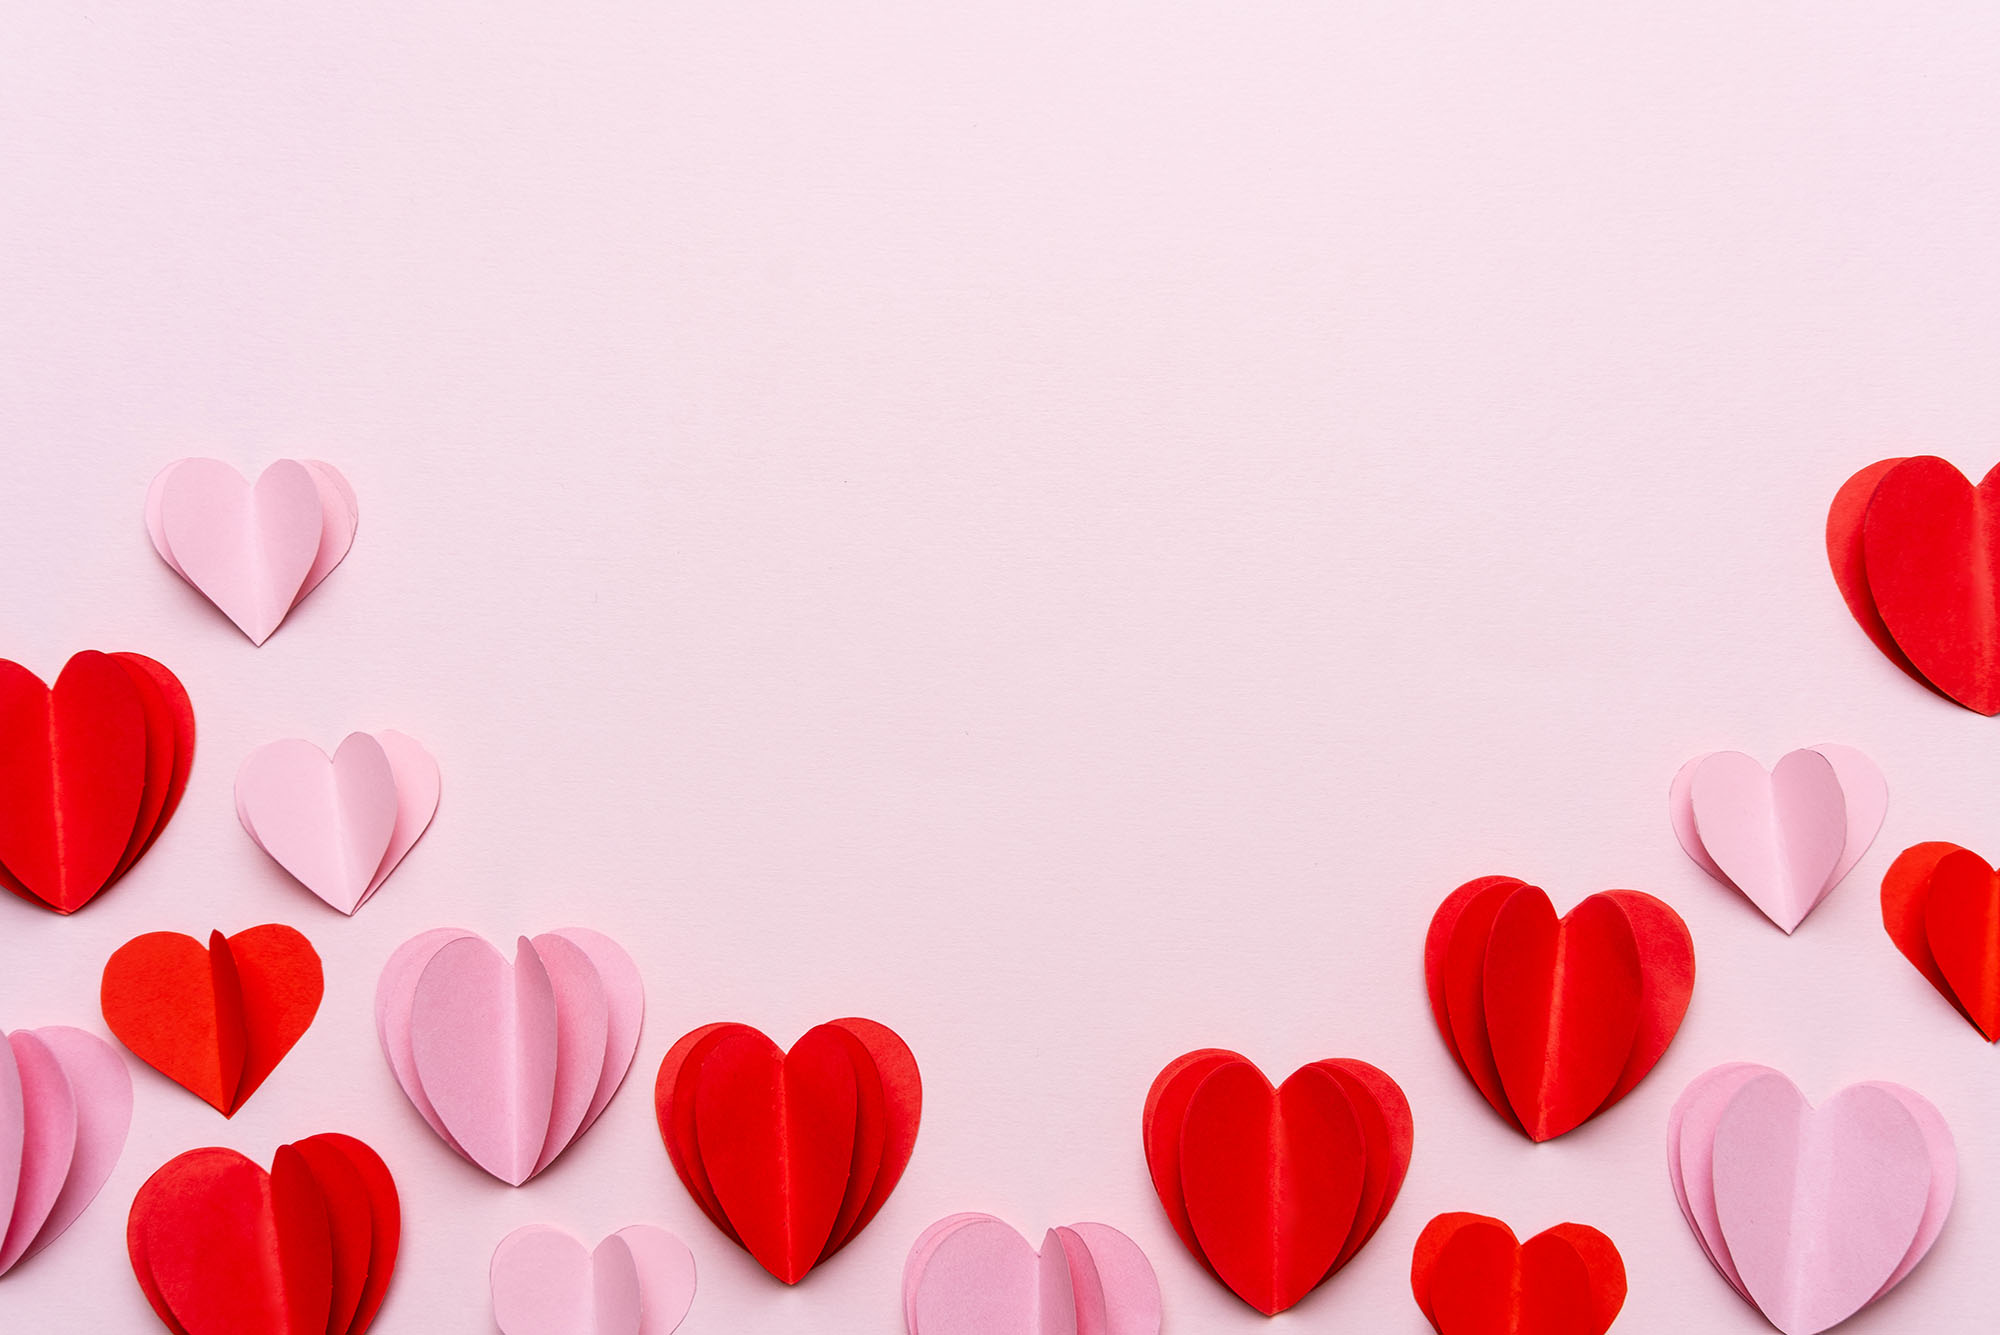 For This Valentine's Day: Messages of Love and Gratitude to